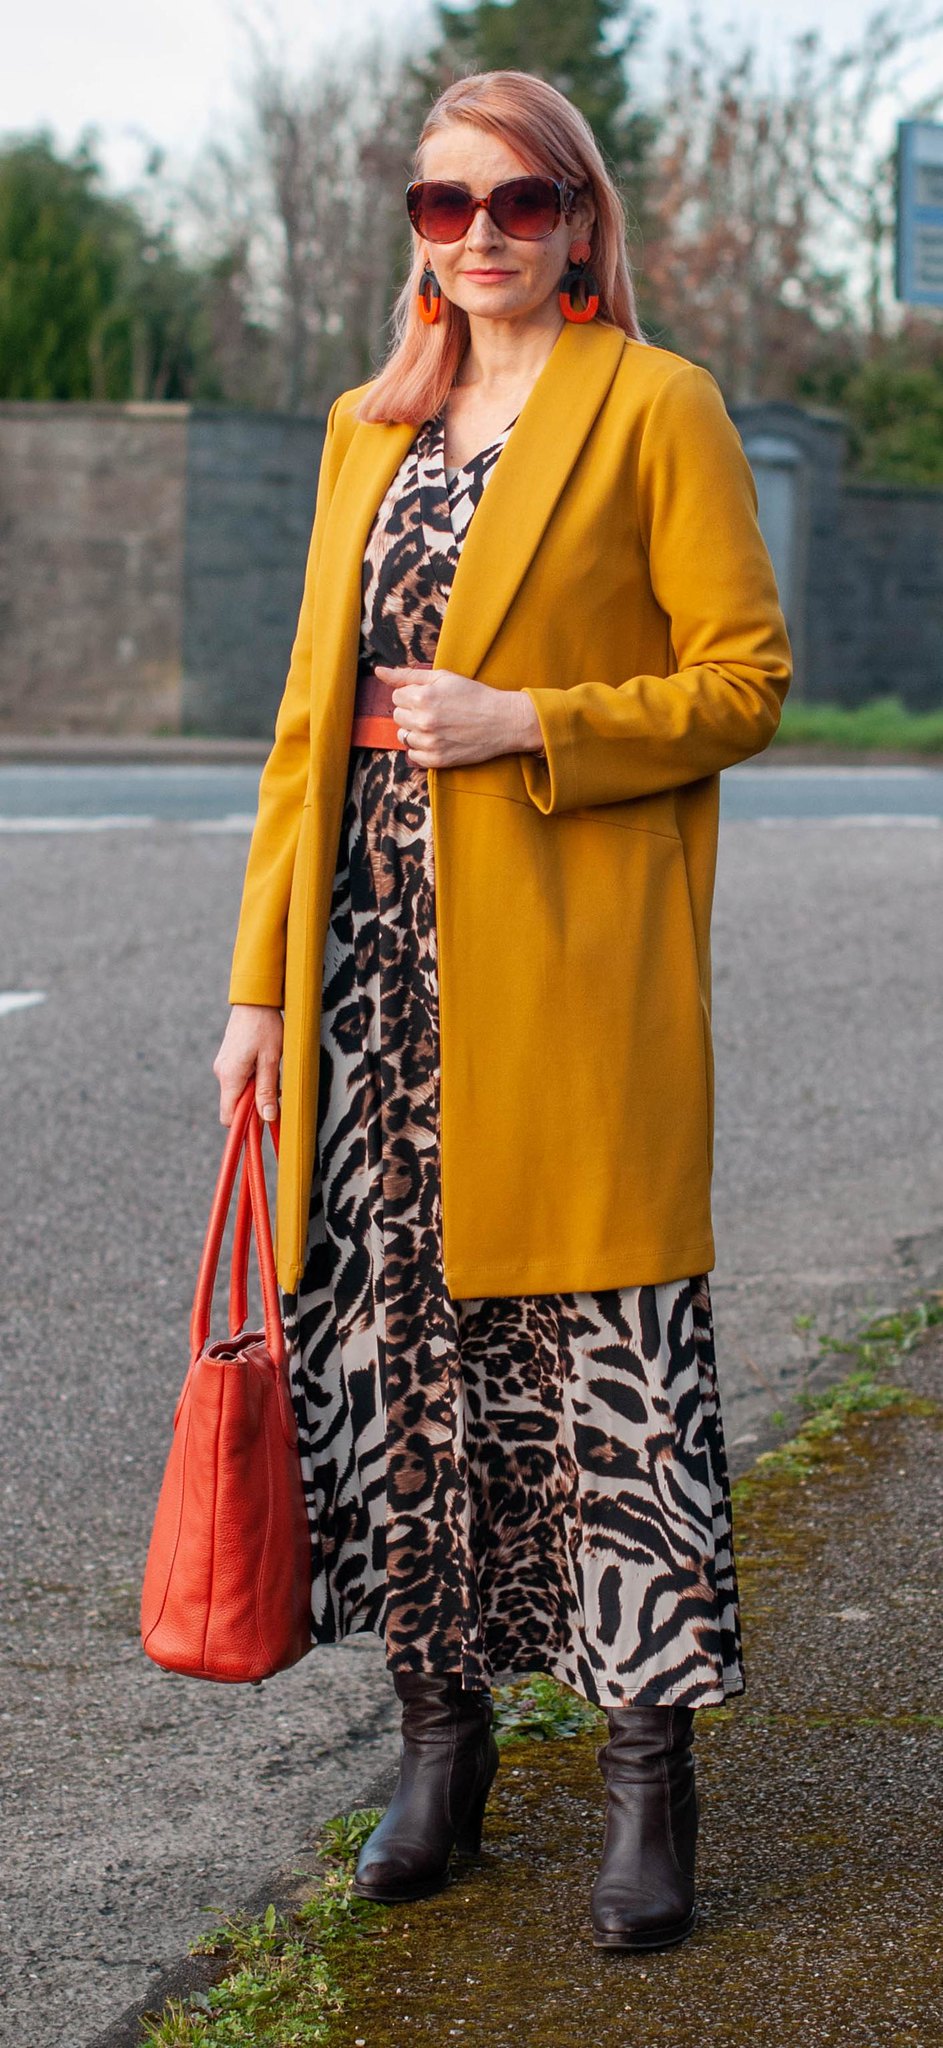 Animal Print Maxi Dress With Yellow and Orange | Not Dressed As Lamb, Over 40 Style